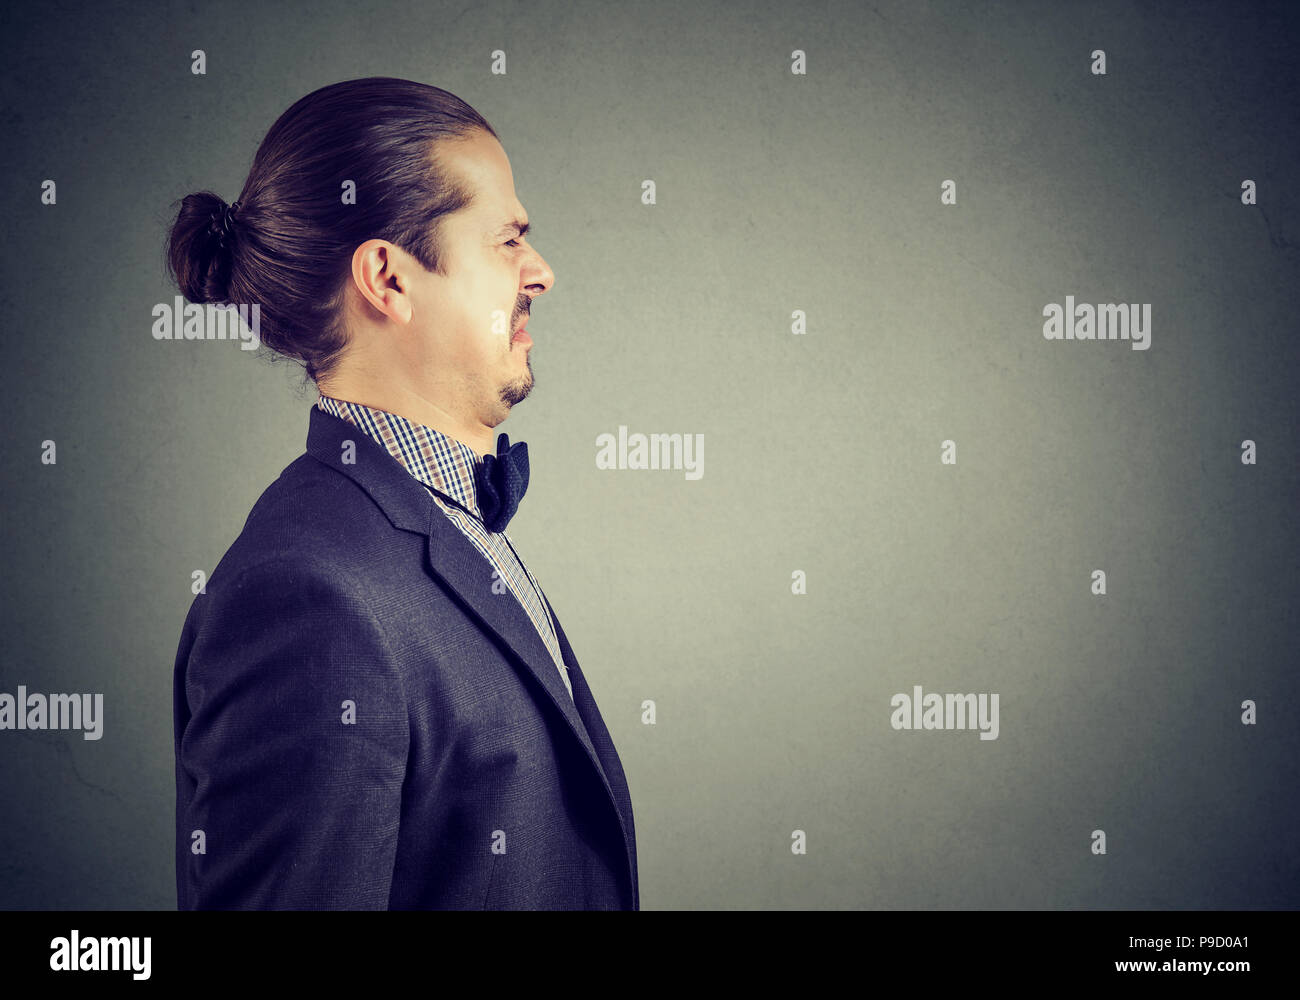 Side portrait of a disgusted young business man Stock Photo